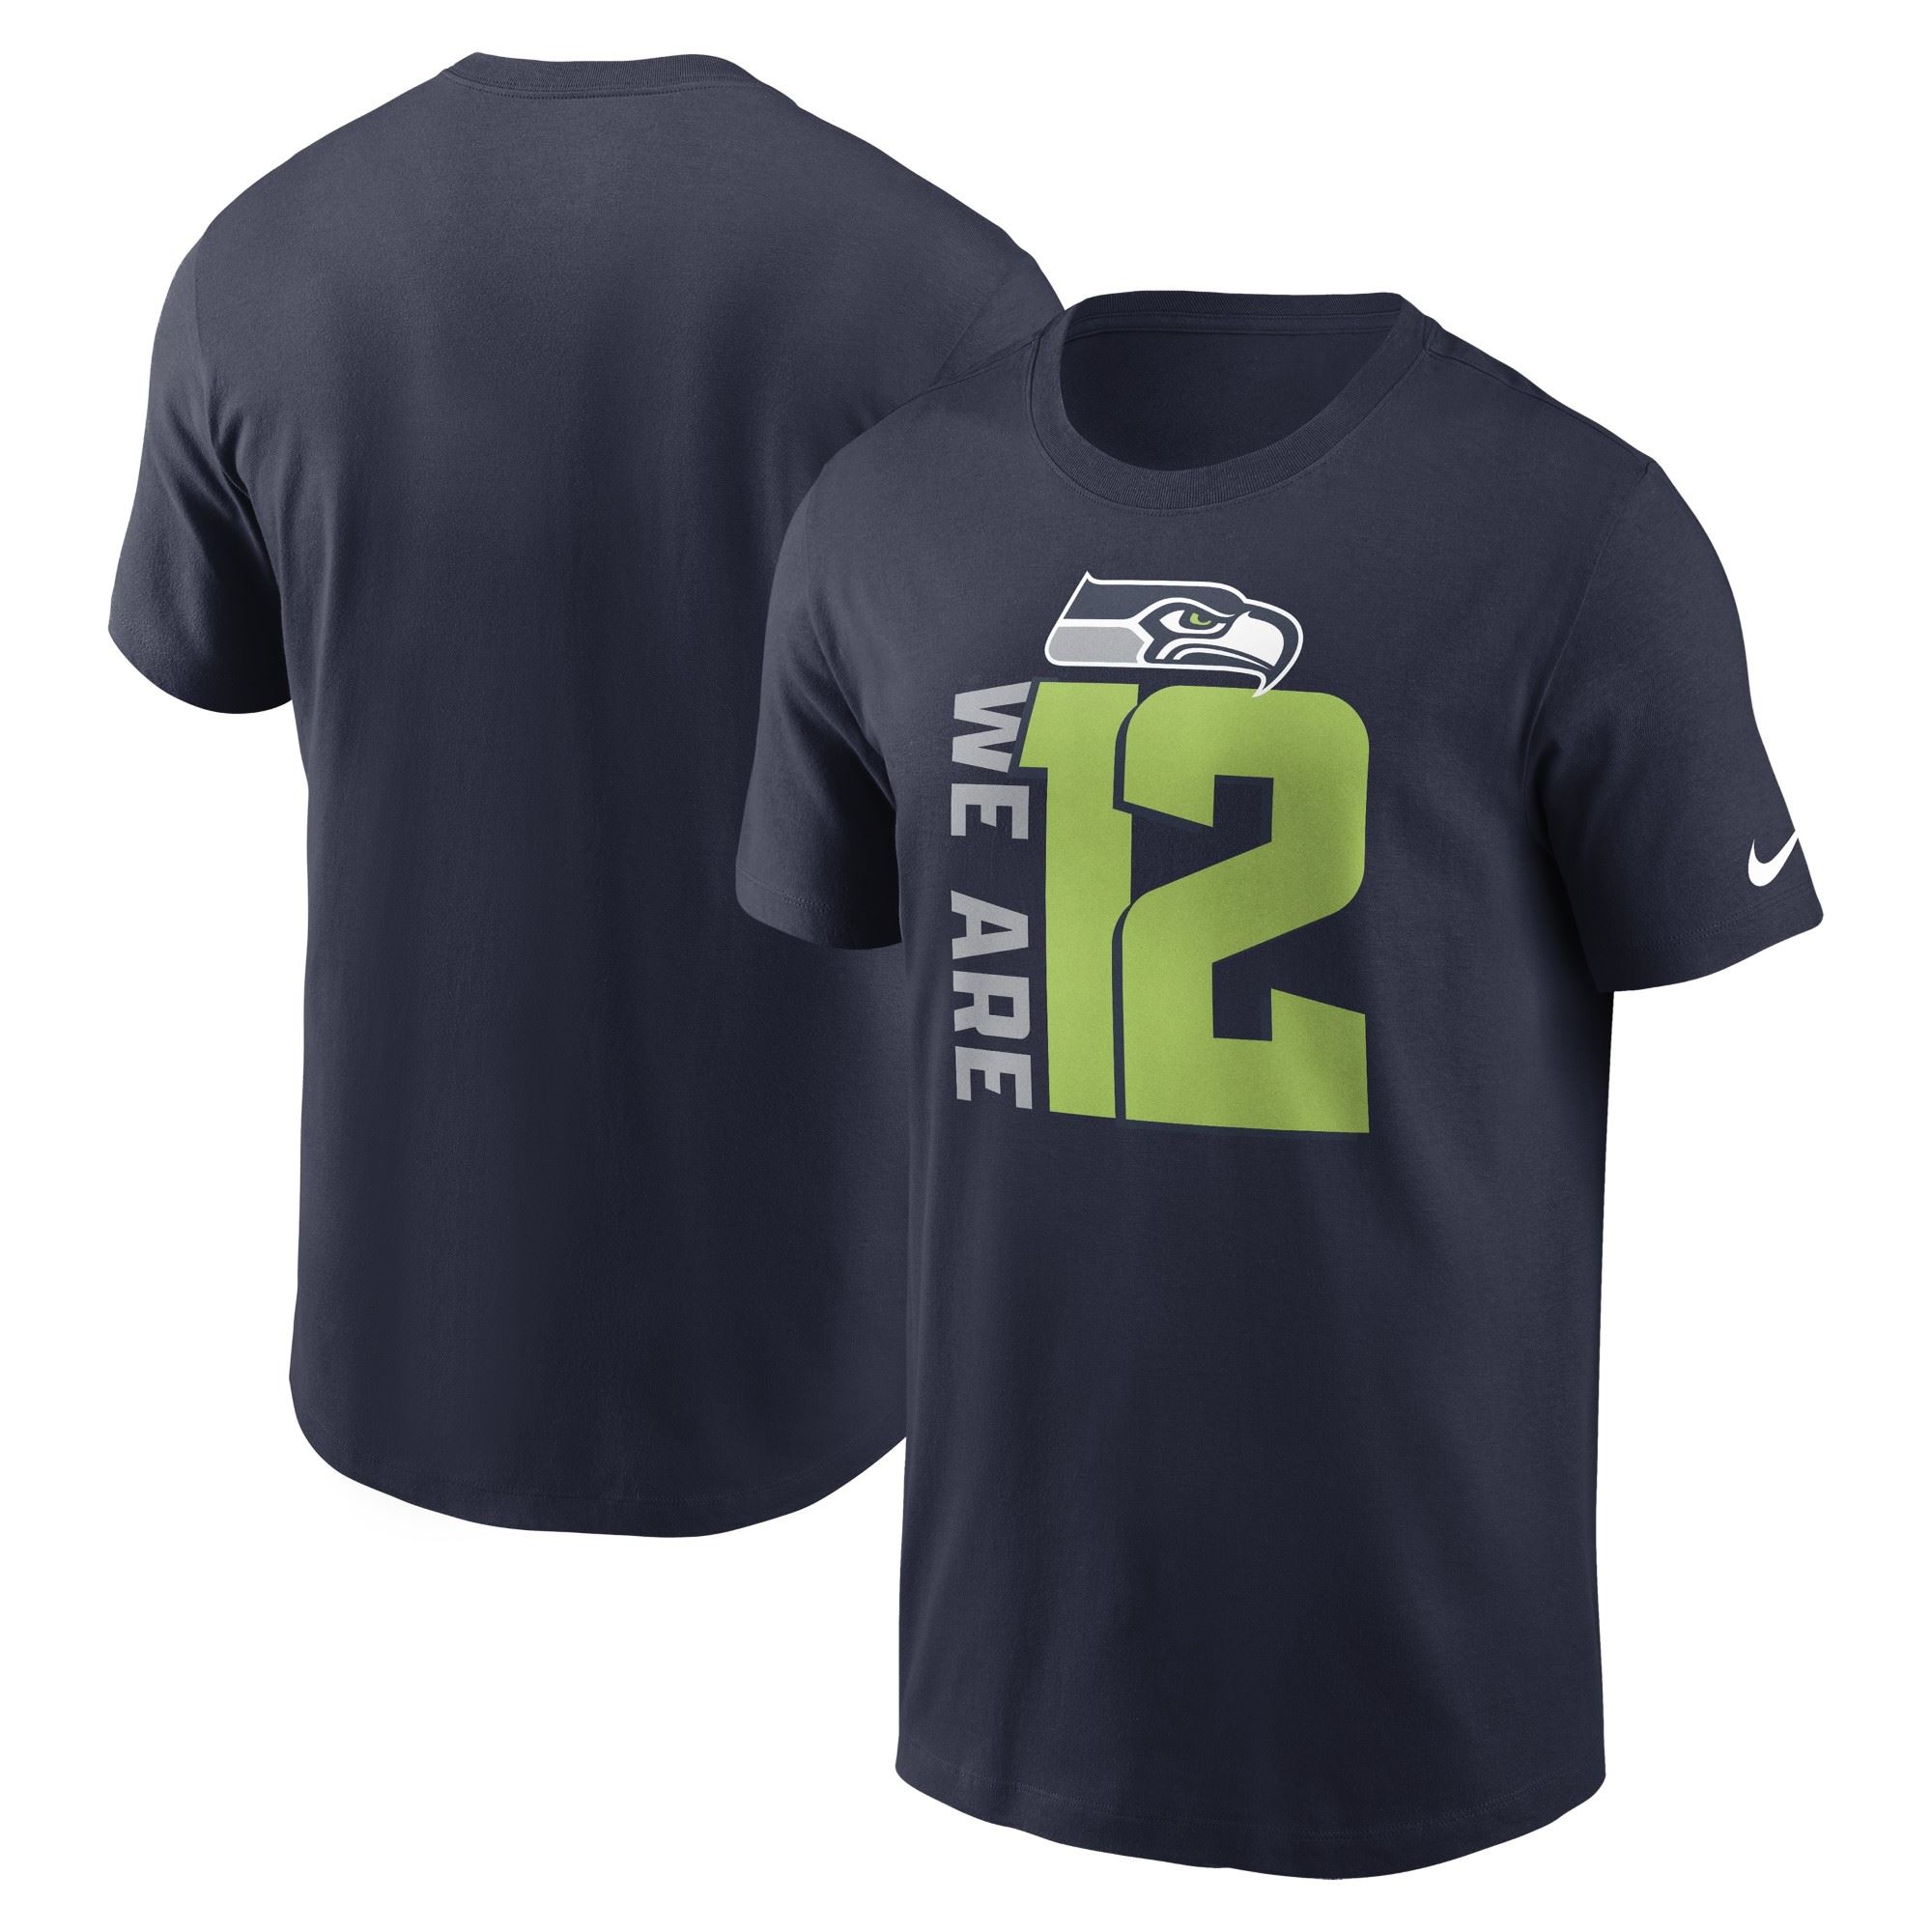 Seattle Seahawks Navy NFL Local Essential T-Shirt Nike 